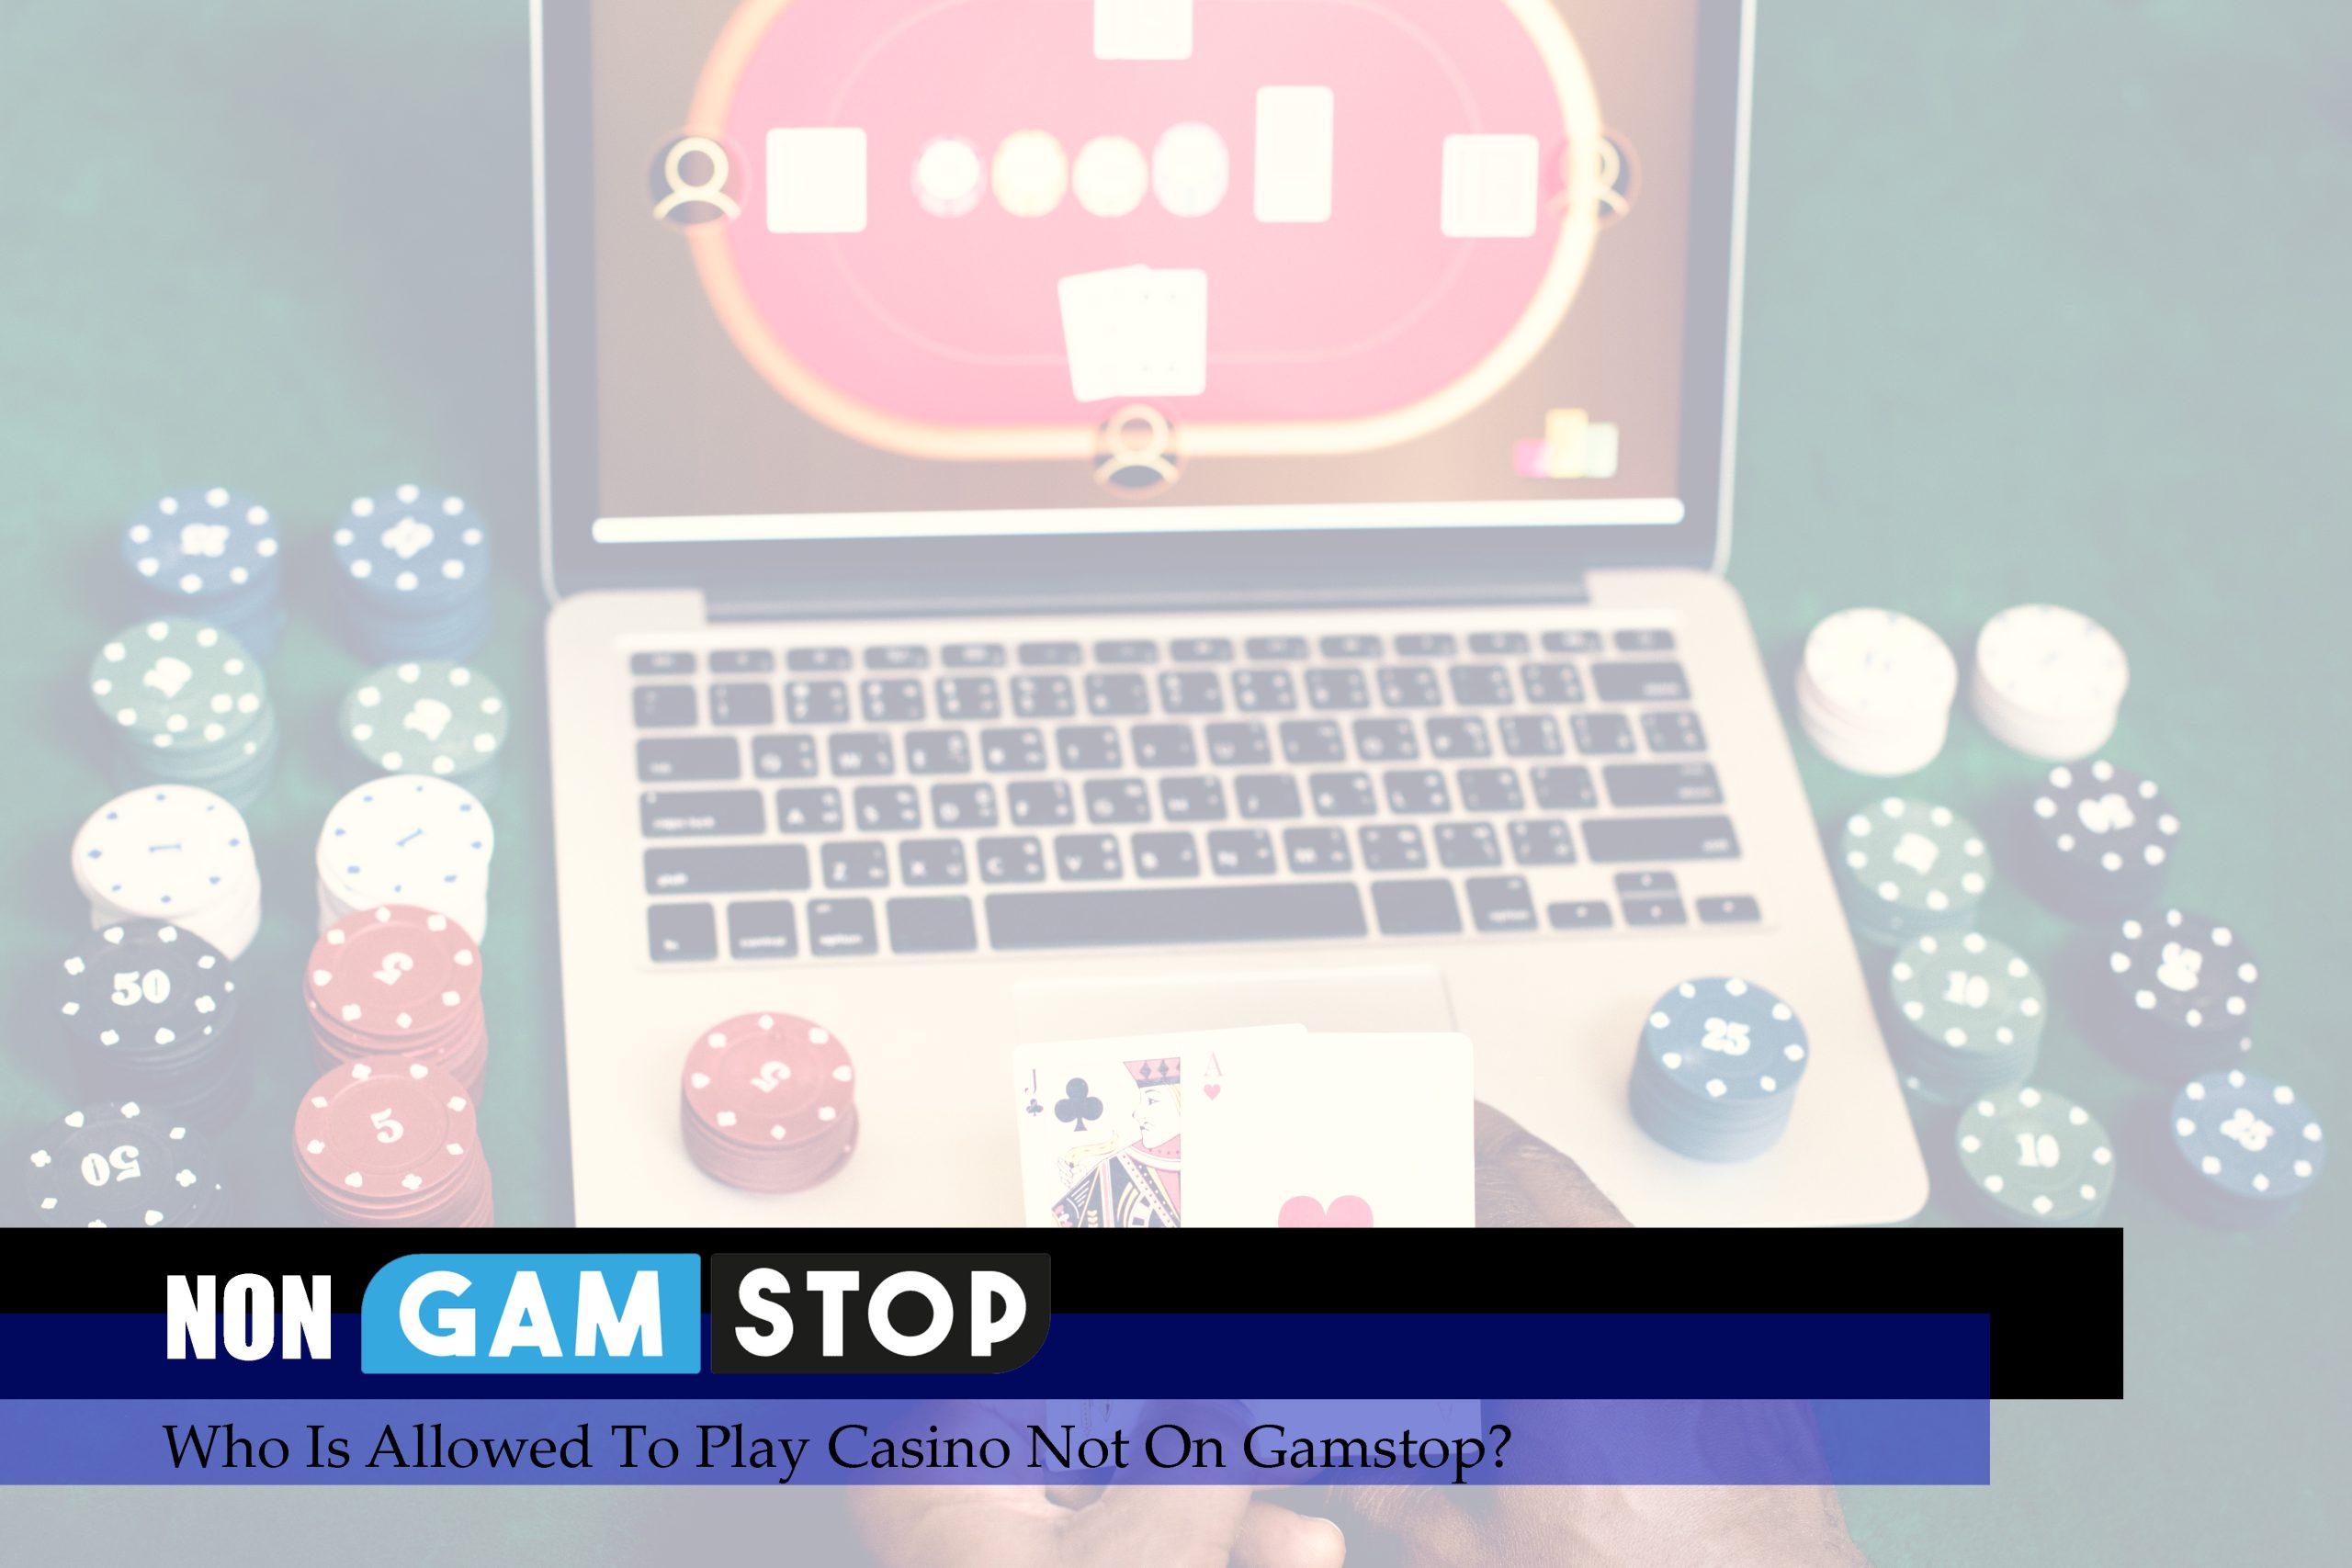 Who Is Allowed To Play Casino Not On Gamstop?